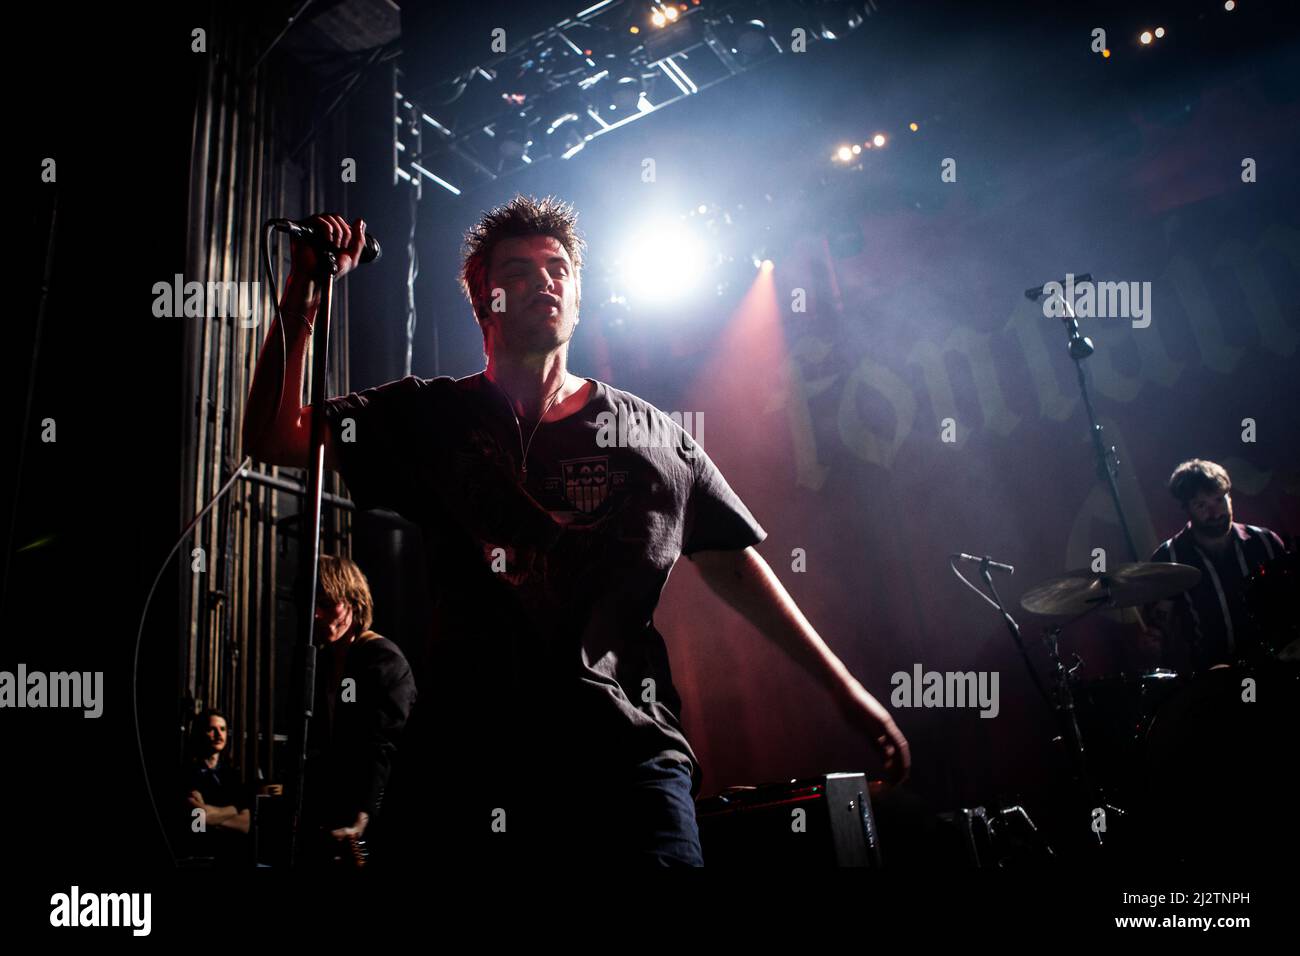 Copenhagen, Denmark. 02nd, April 2022. The Irish post-punk band Fontaines D.C. performs a live concert at VEGA in Copenhagen. Here vocalist Grian Chatten is seen live on stage. (Photo credit: Gonzales Photo - Christian Hjorth). Stock Photo